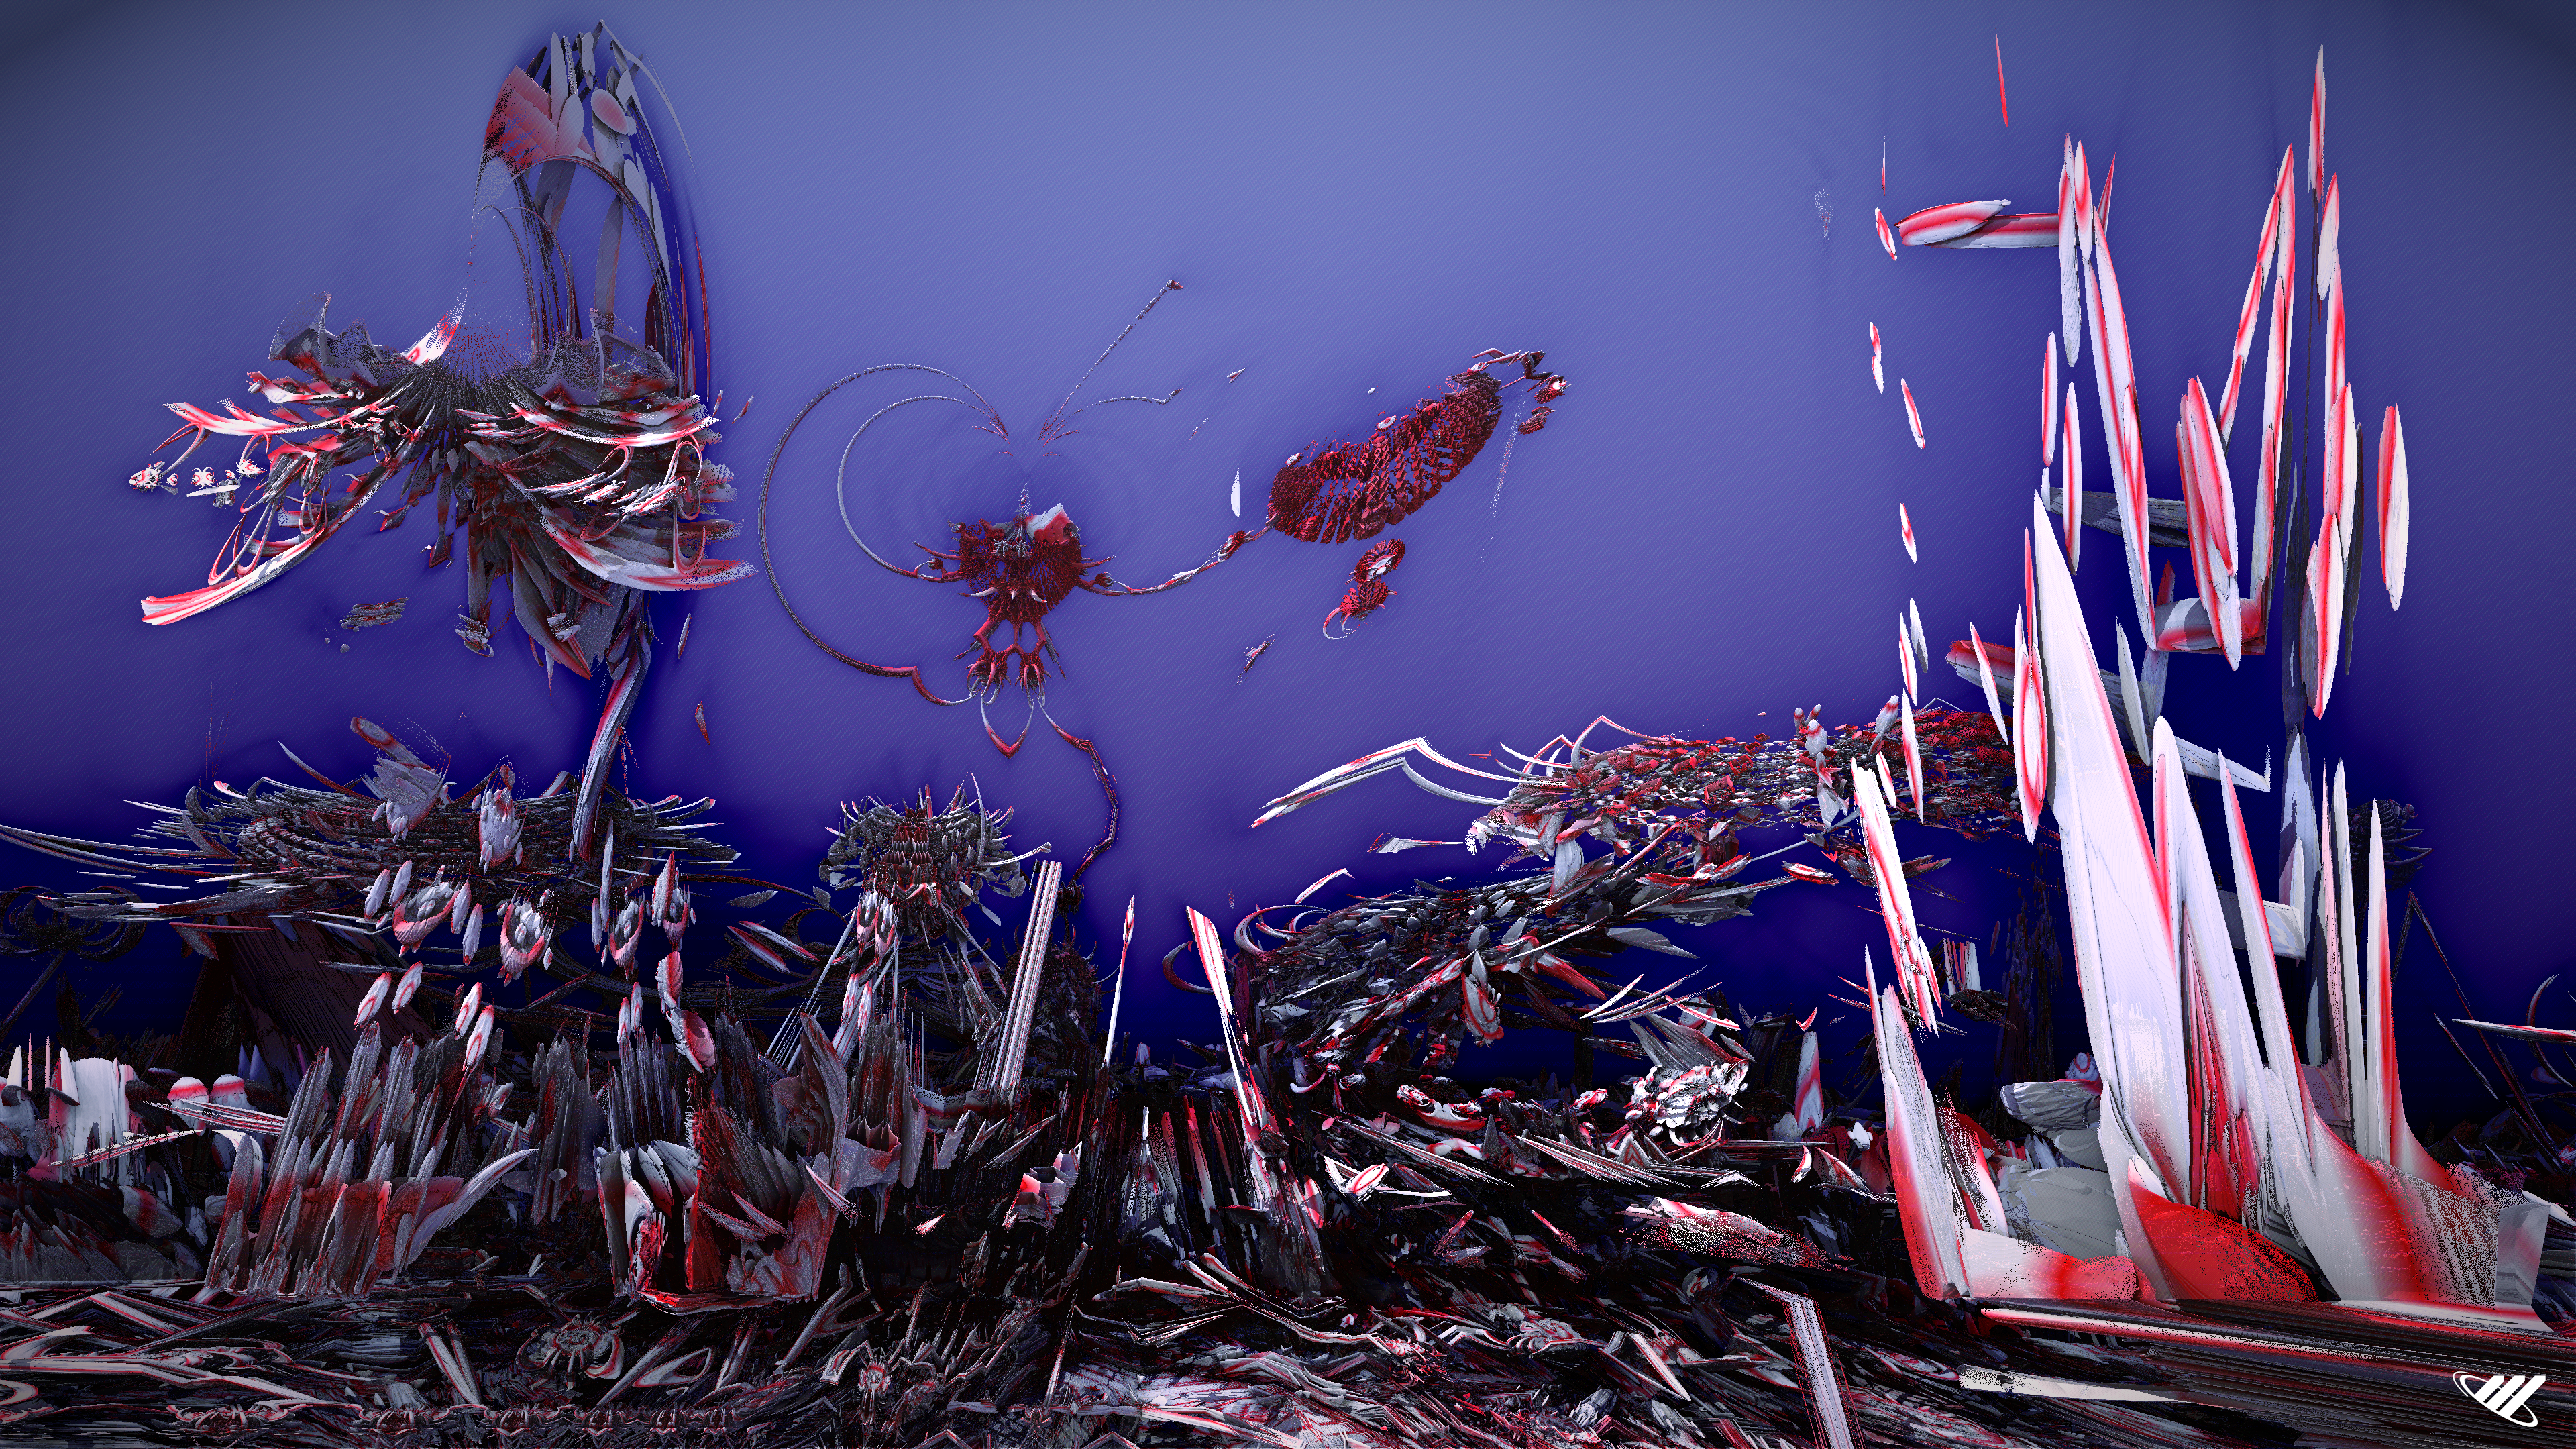 Hellish fractal landscape in white, red and purple.